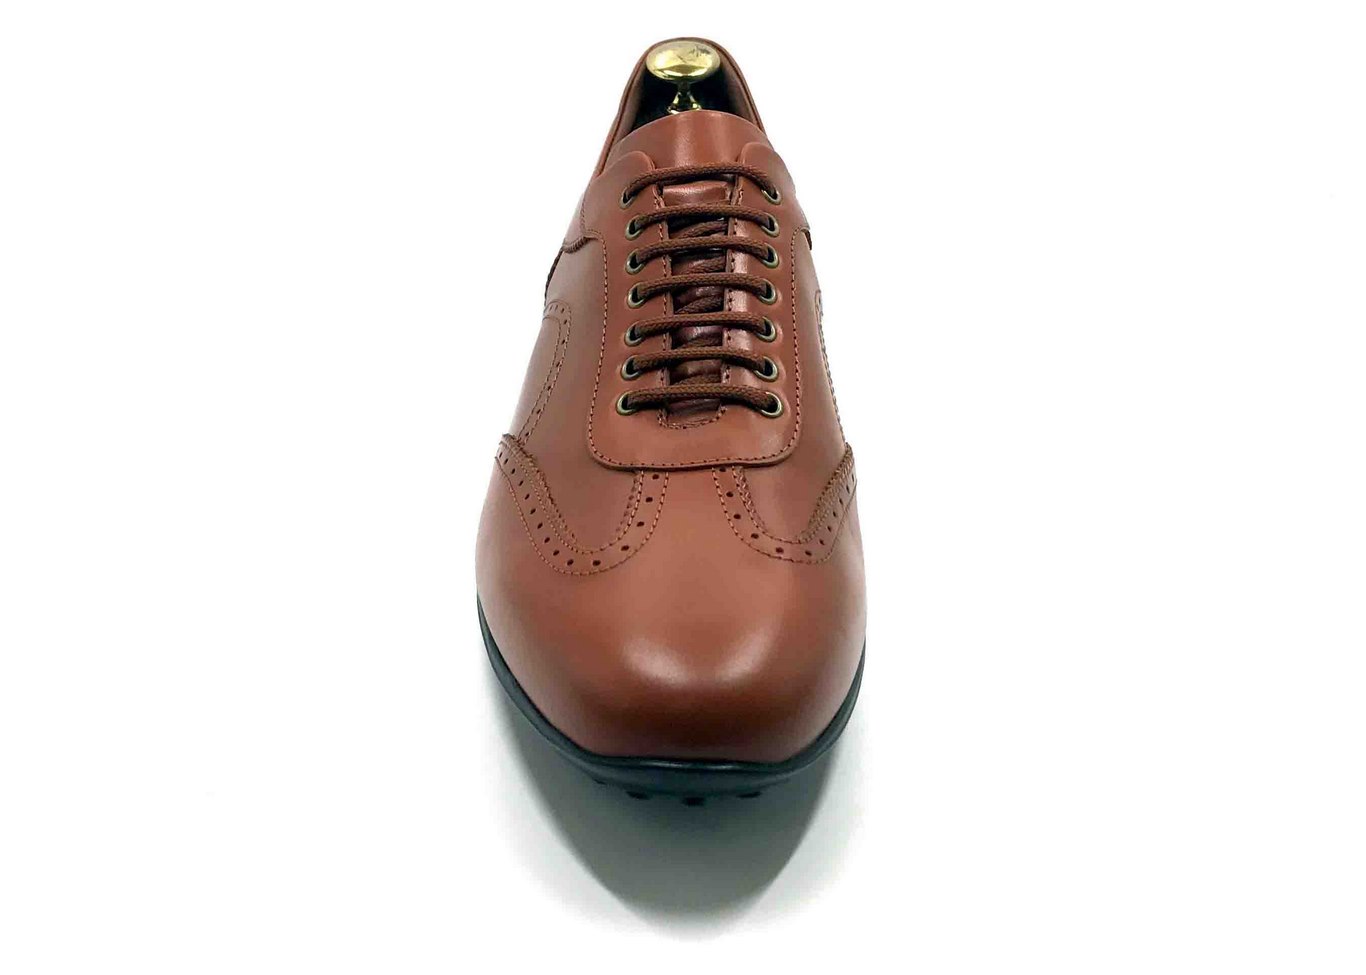 Smart Sneaker in light Brown calfskin with extractable innersole